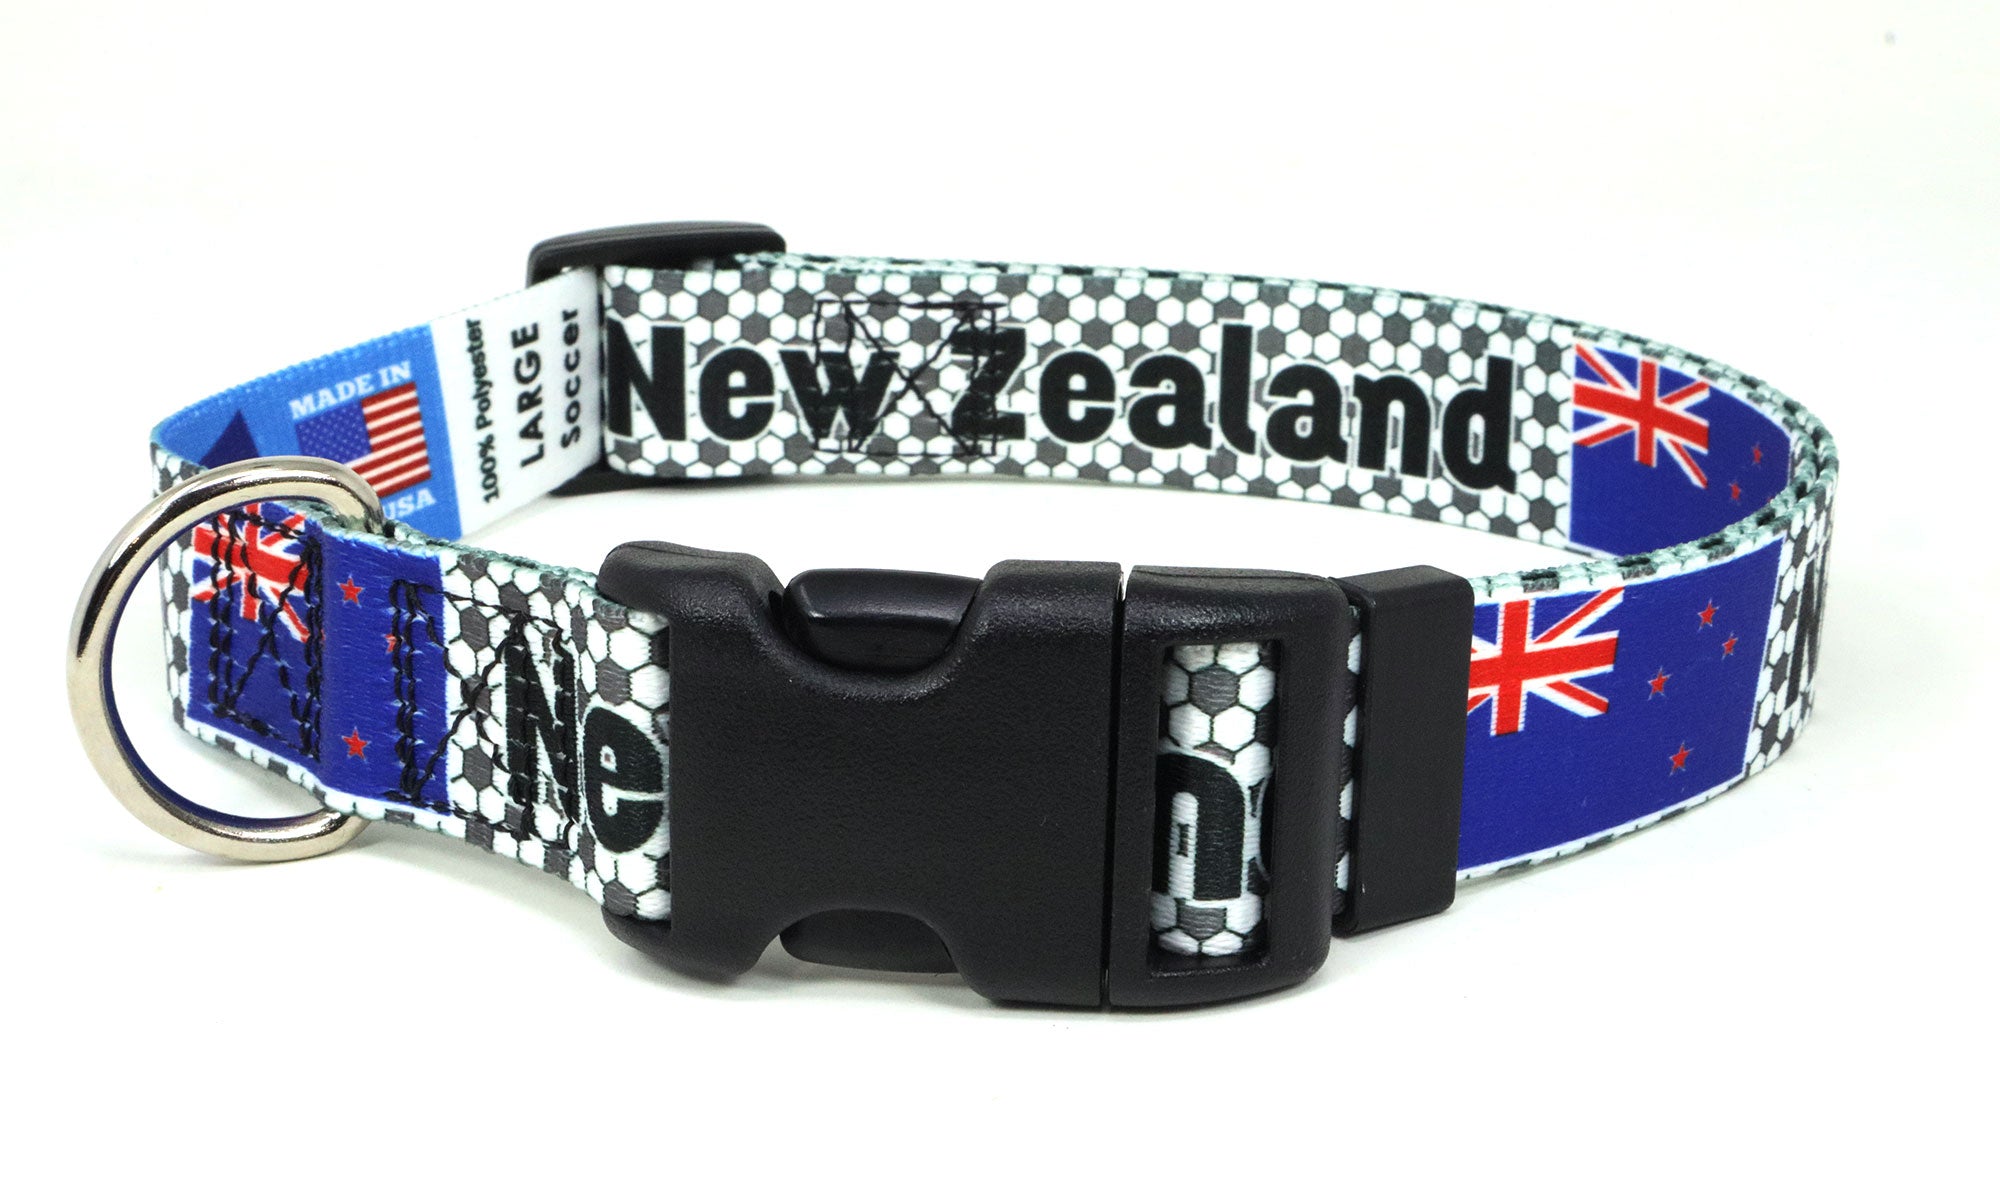 New Zealand Dog Collar for Soccer Fans | Black or Pink | Quick Release or Martingale Style | Made in NJ, USA